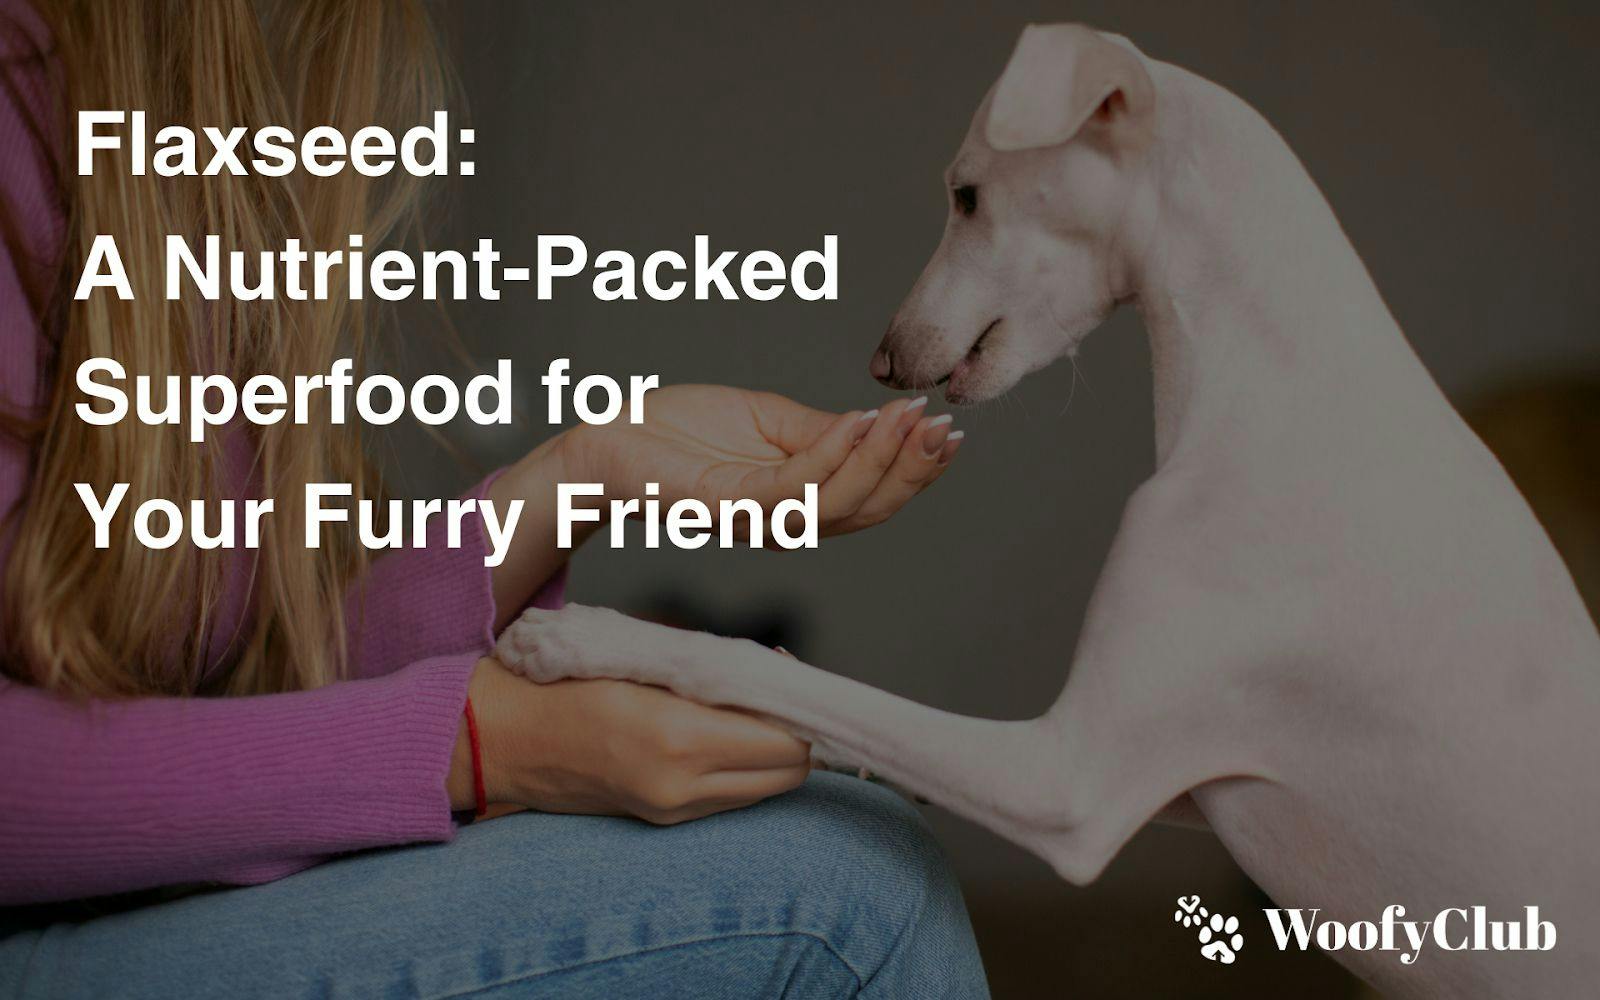 Flaxseed: A Nutrient-Packed Superfood For Your Furry Friend